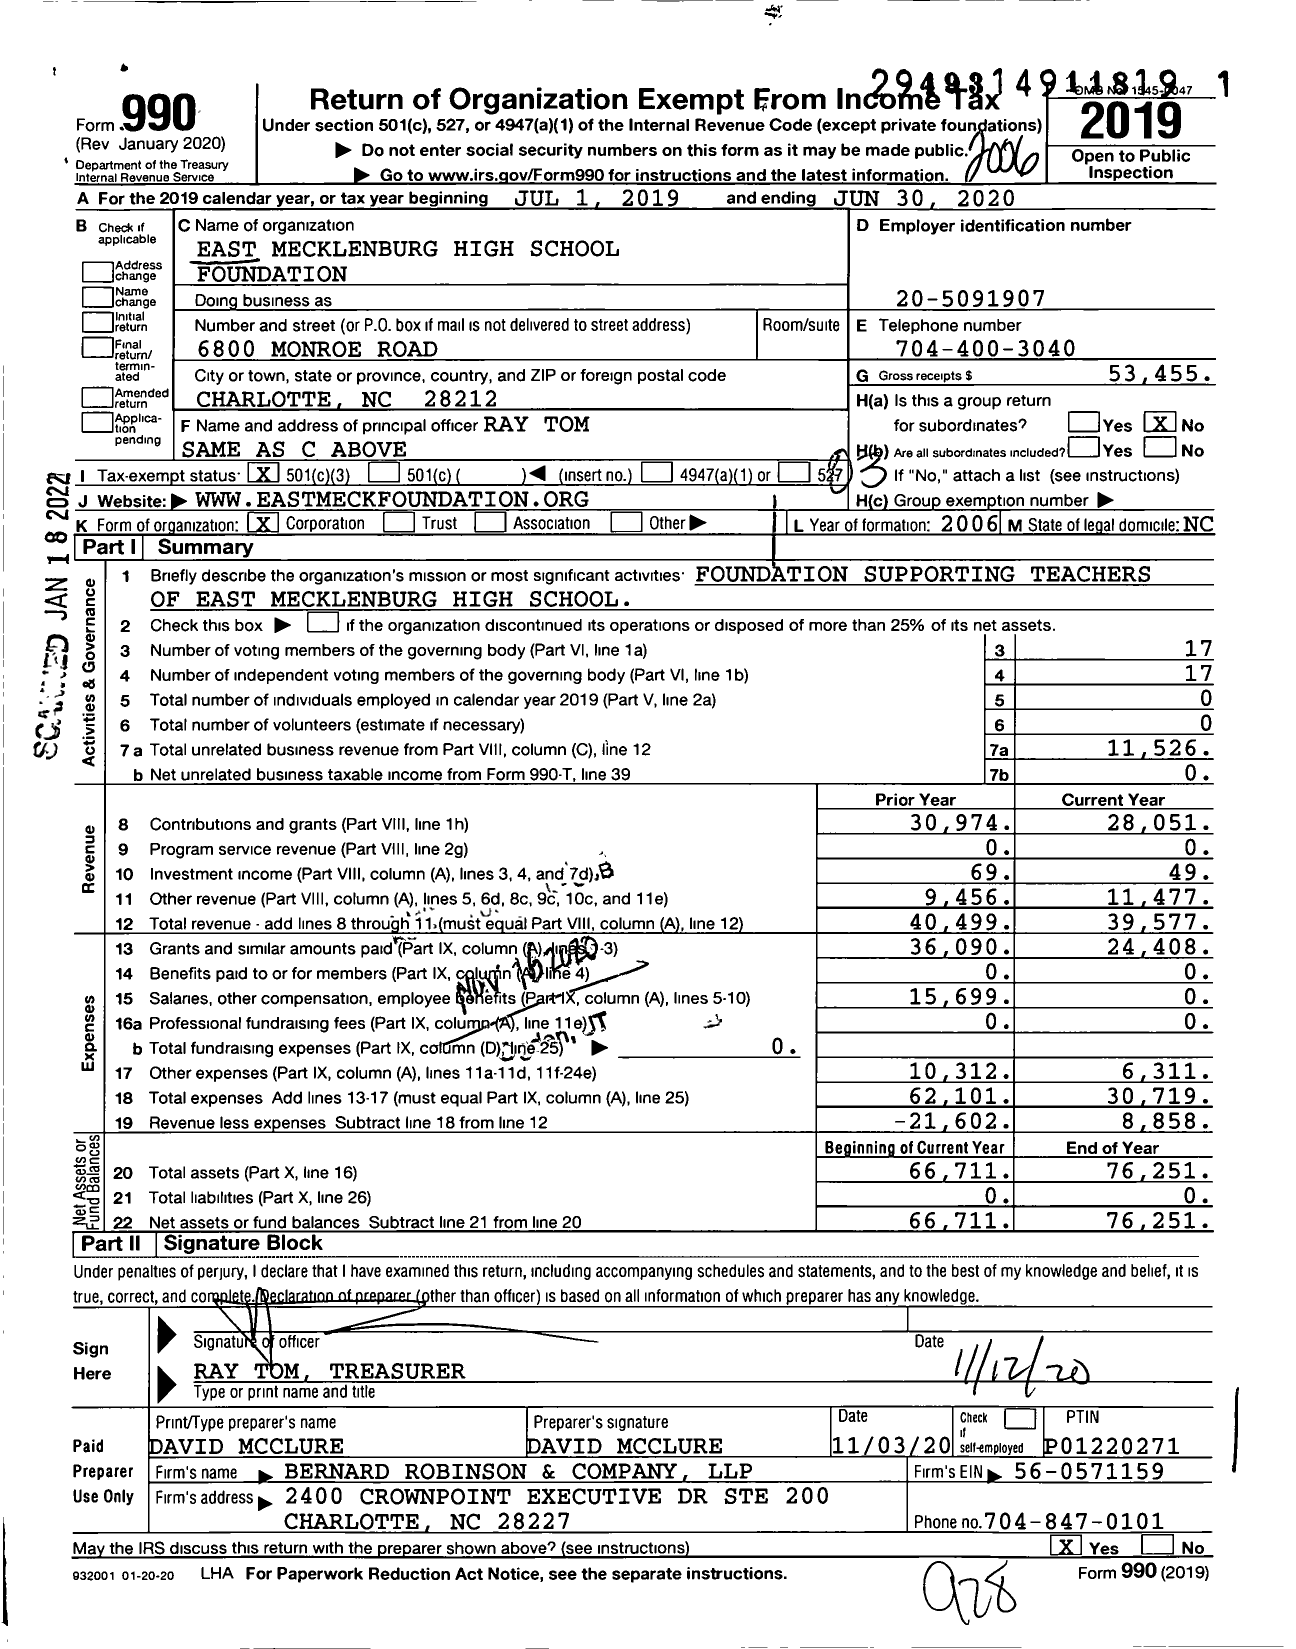 Image of first page of 2019 Form 990 for East Mecklenburg High School Foundation